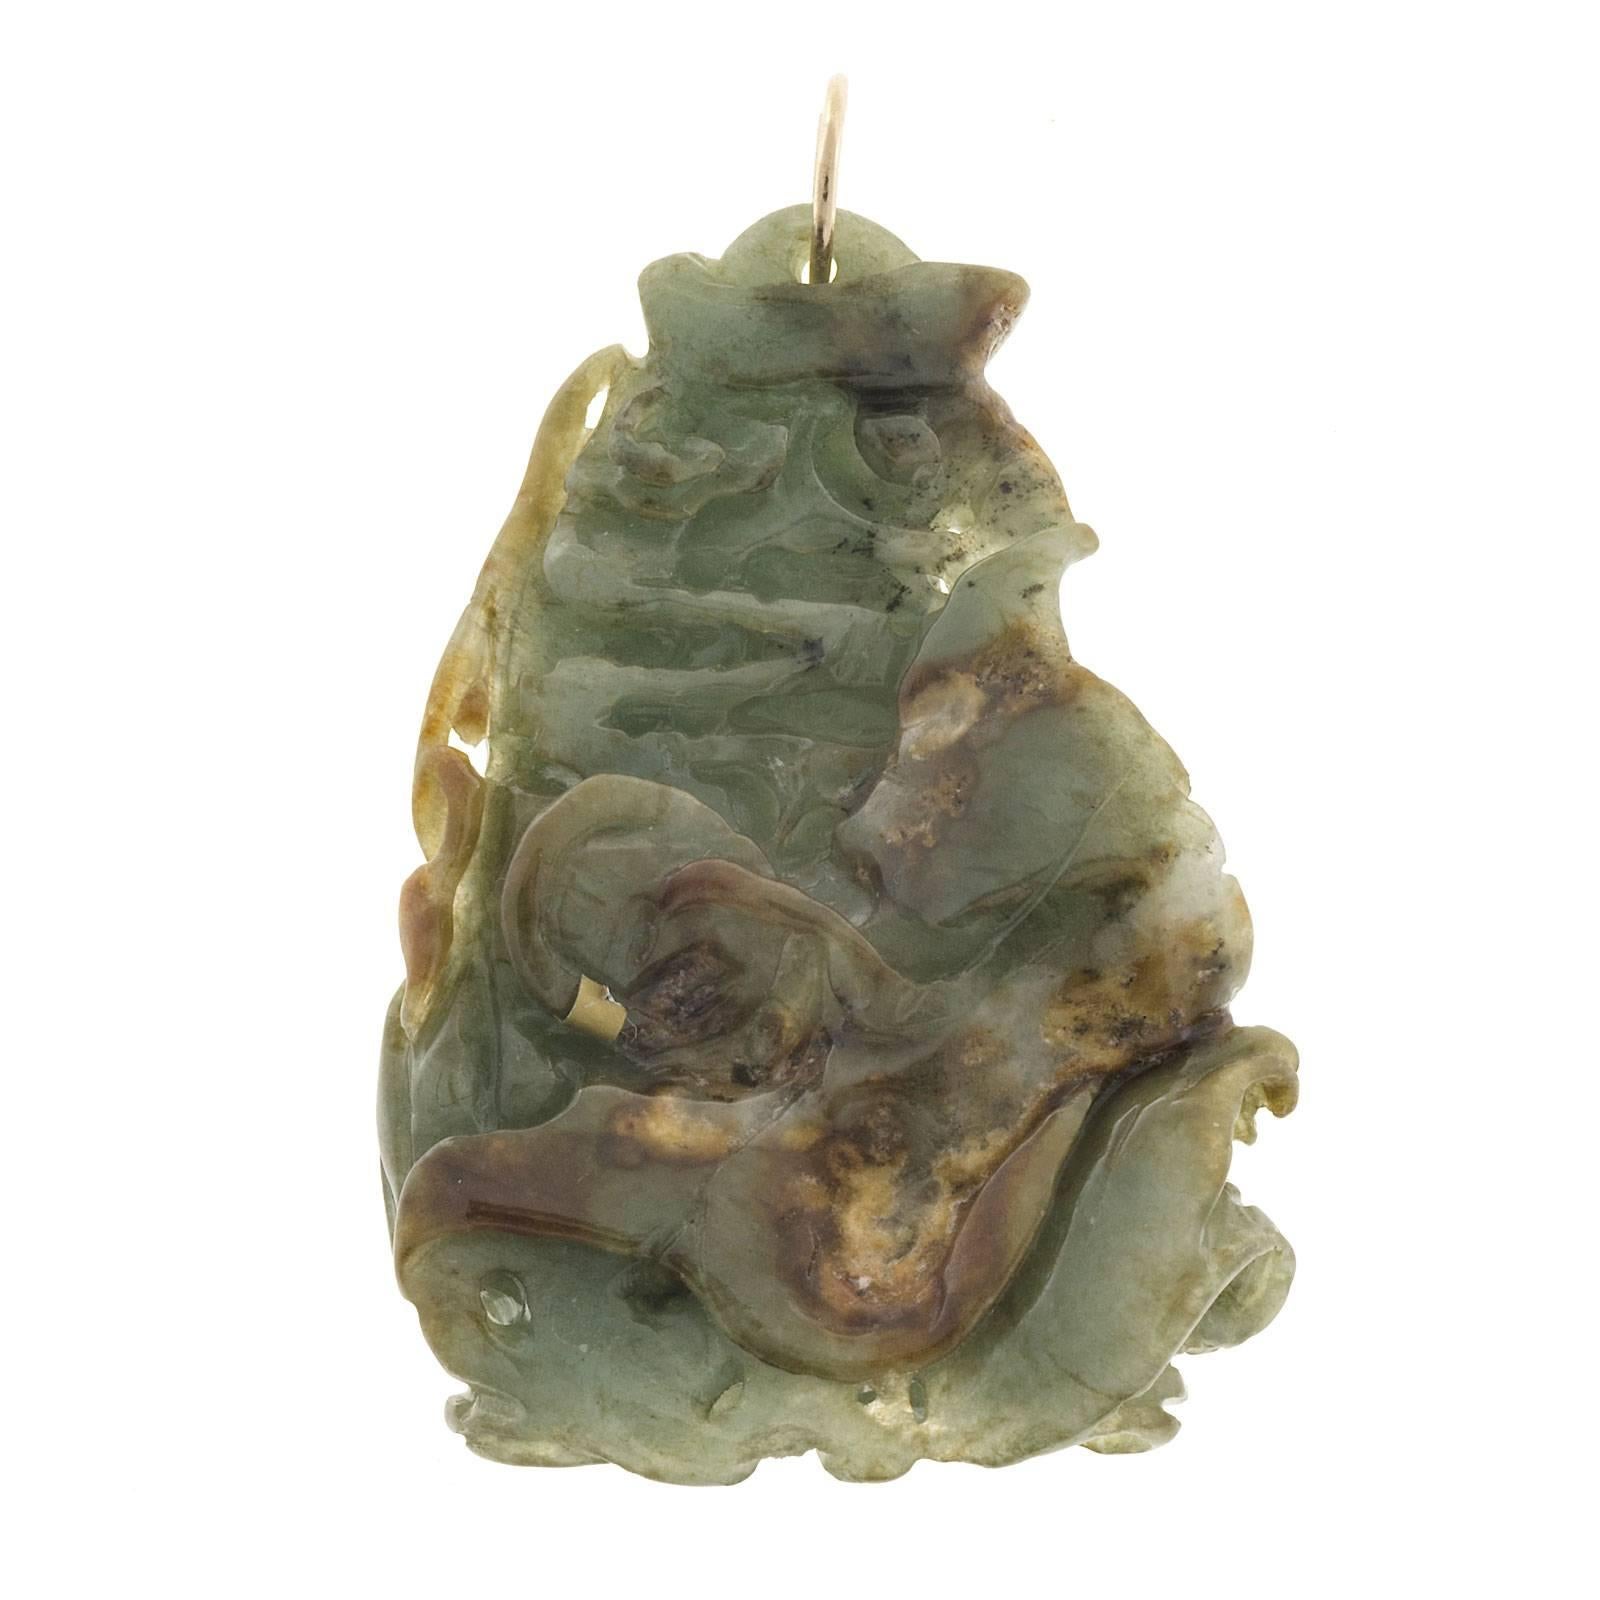 Untreated Jadeite Jade carved fish pendant. GIA certified natural and no impregnation. 14k gold pendant loop.

1 Jadeite Jade carving, approx. total weight 156.16cts, 55.45 x 39.13 x 13.63mm, variegated green brown and white translucent, natural